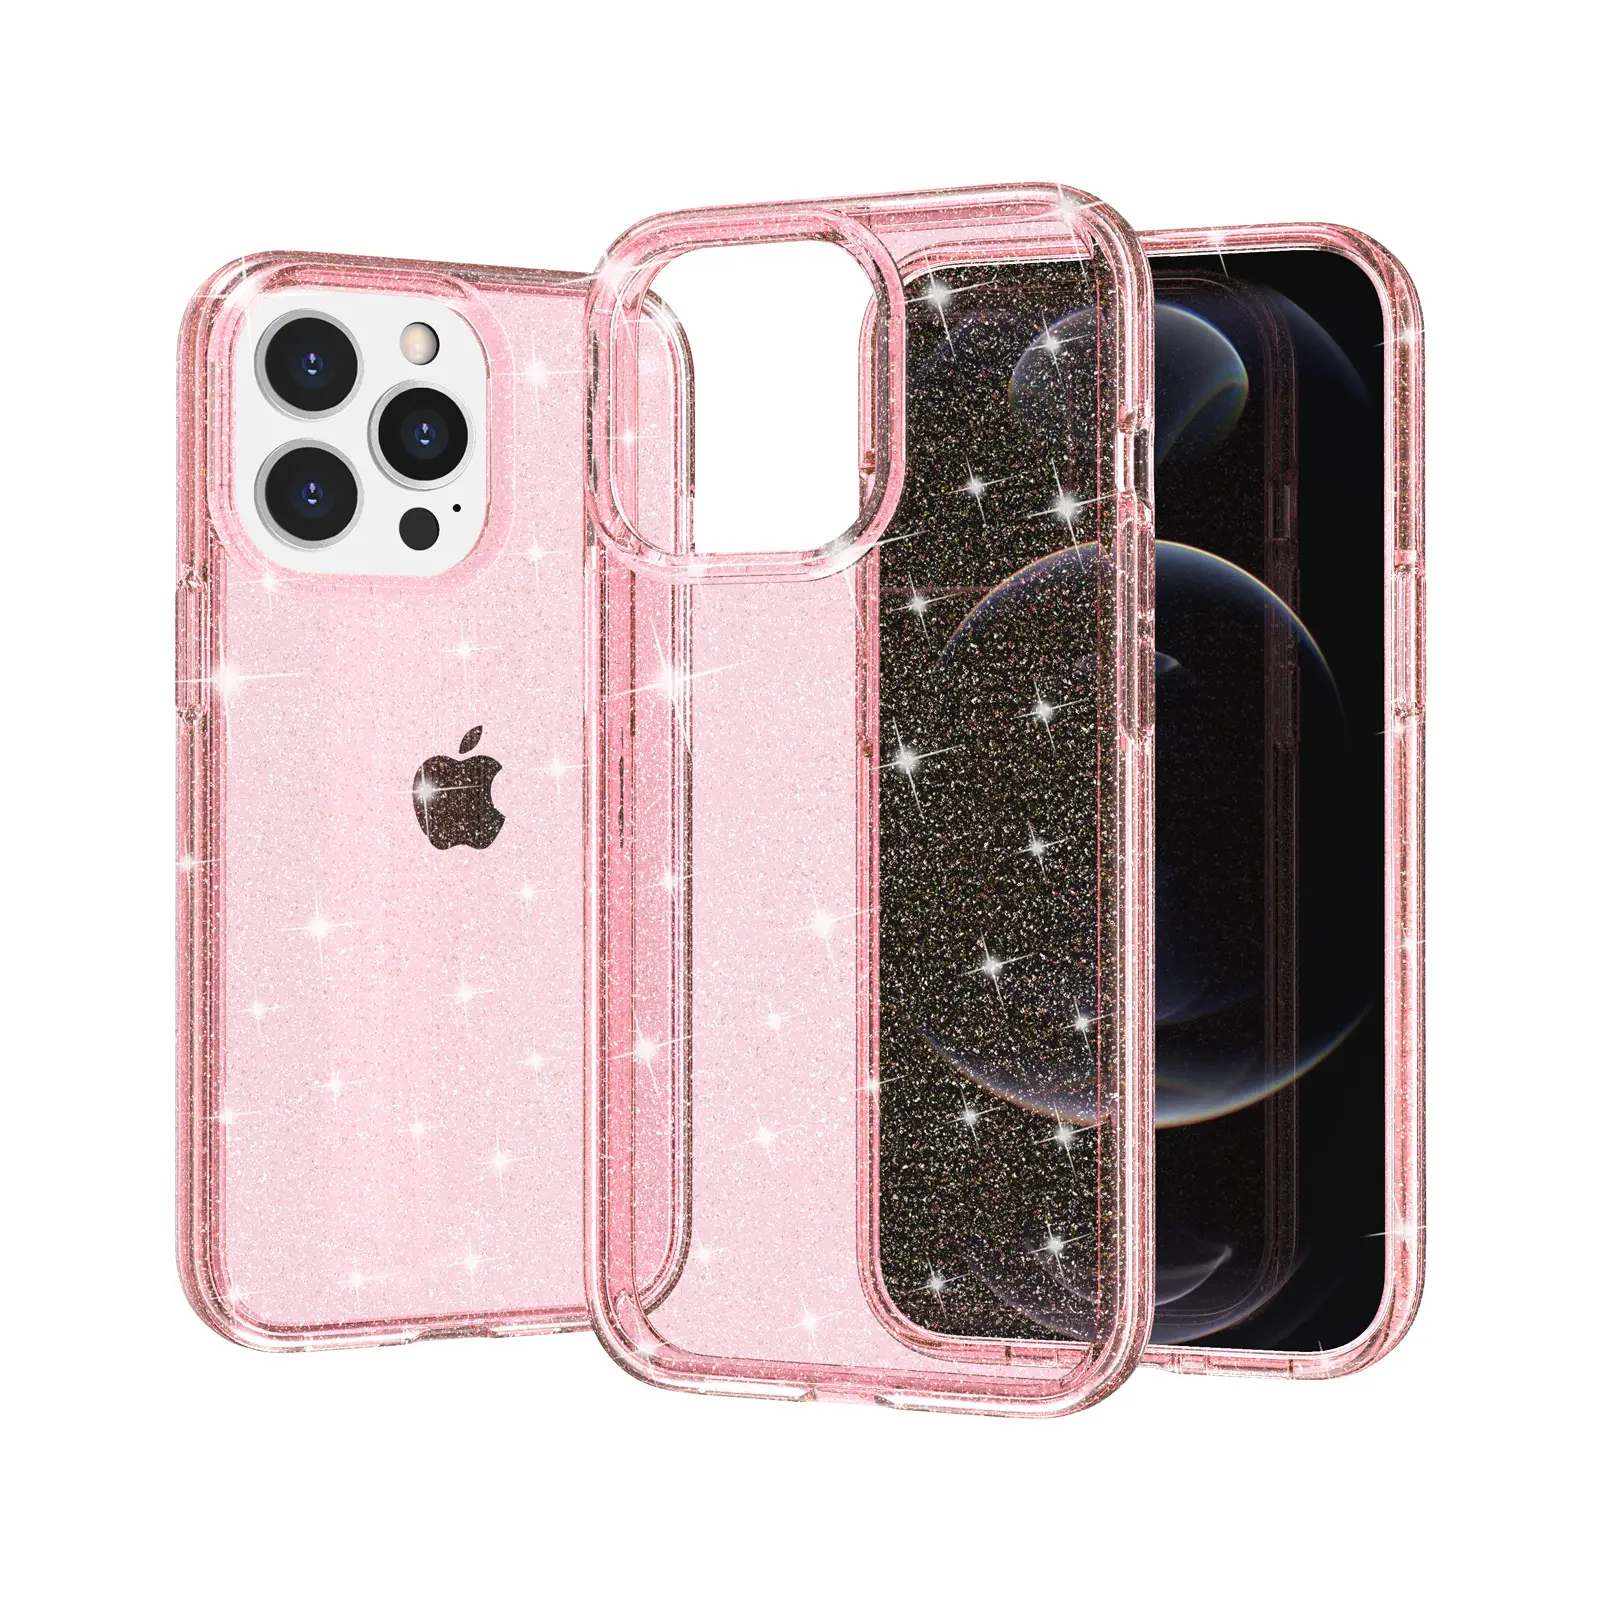 New Shinning Glitter Hard Acrylic Phone Case For iPhone 14 13 12 11 Pro Max X XR 7 8 Plus Transparent Protective Cover